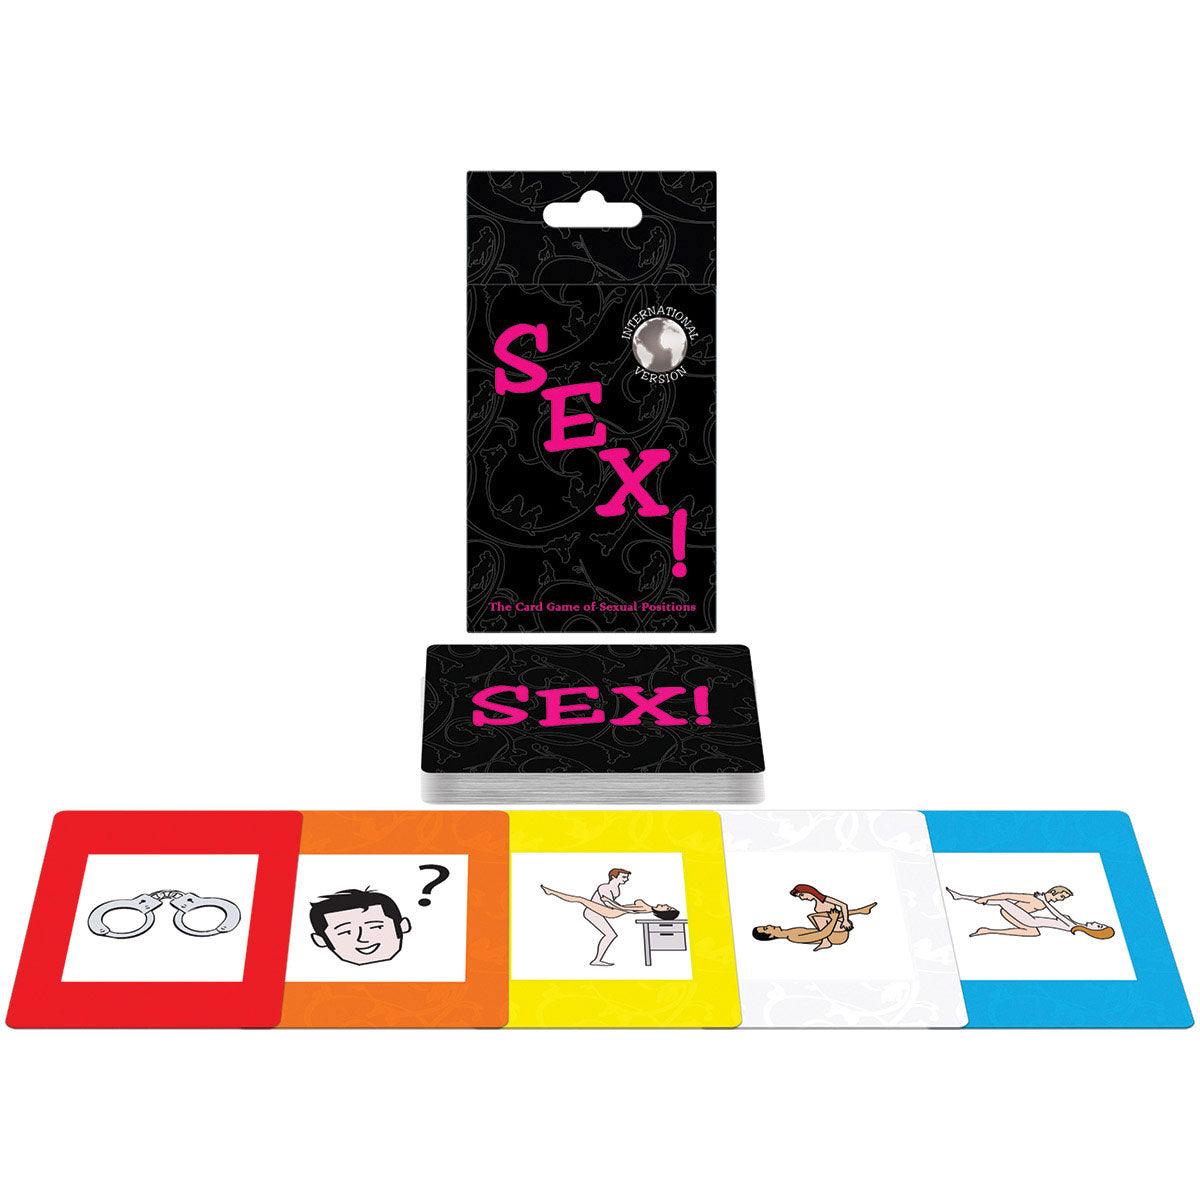 Sex! International Card Game - Buy At Luxury Toy X - Free 3-Day Shipping